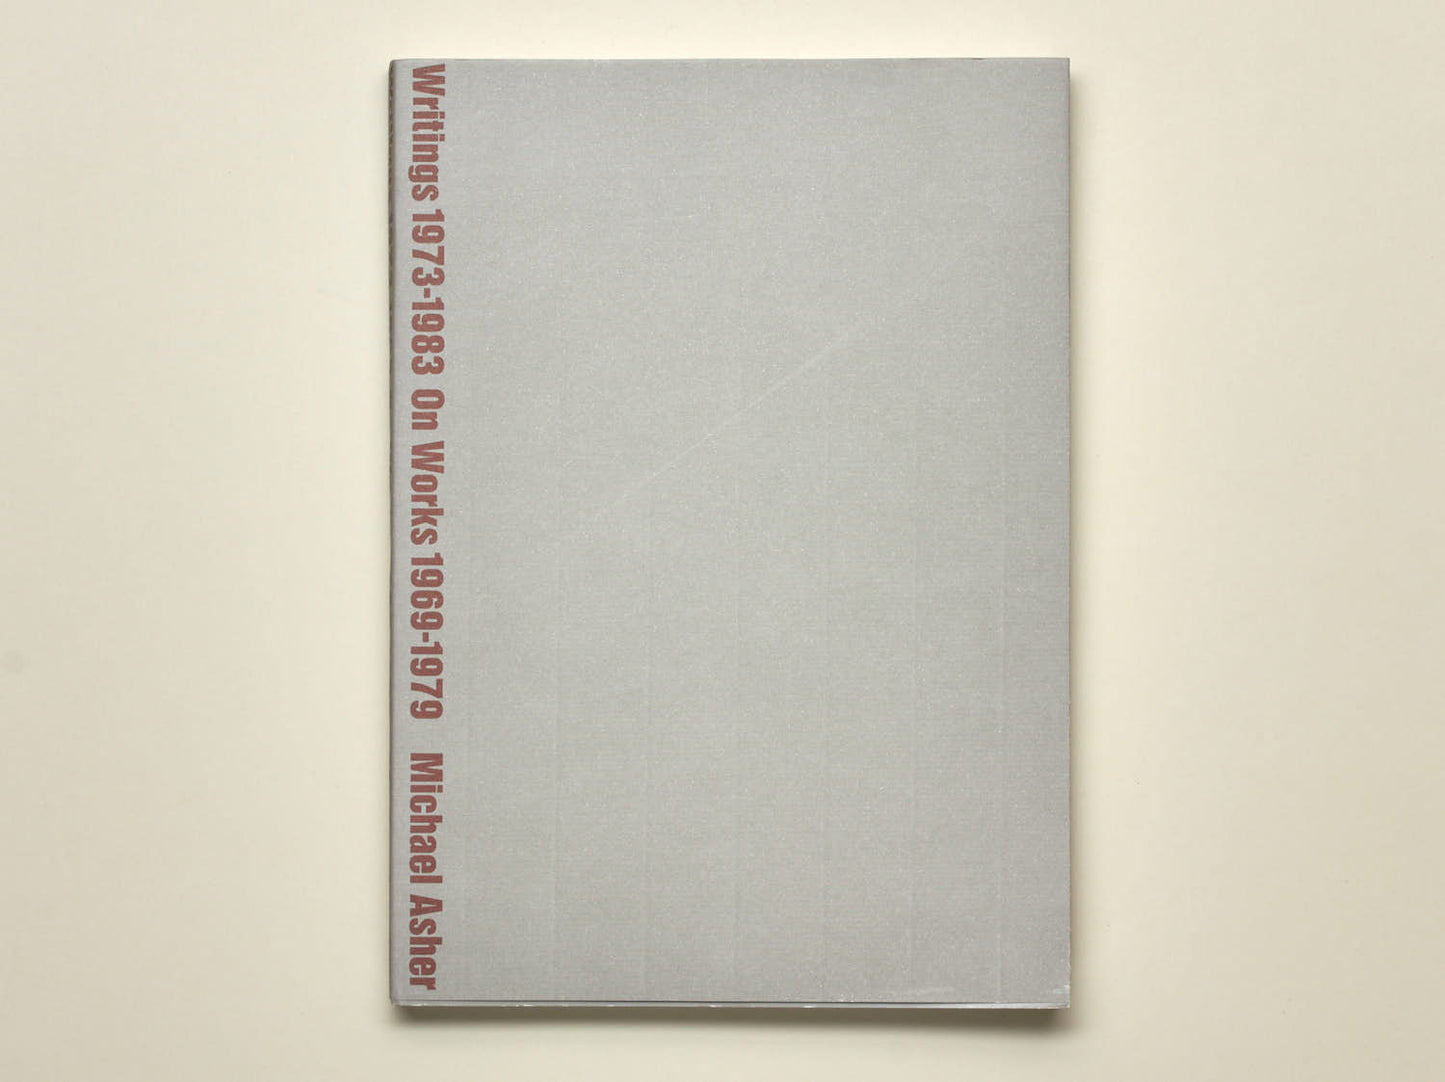 Michael Asher, Writings 1973–1983 on Works 1969–1979